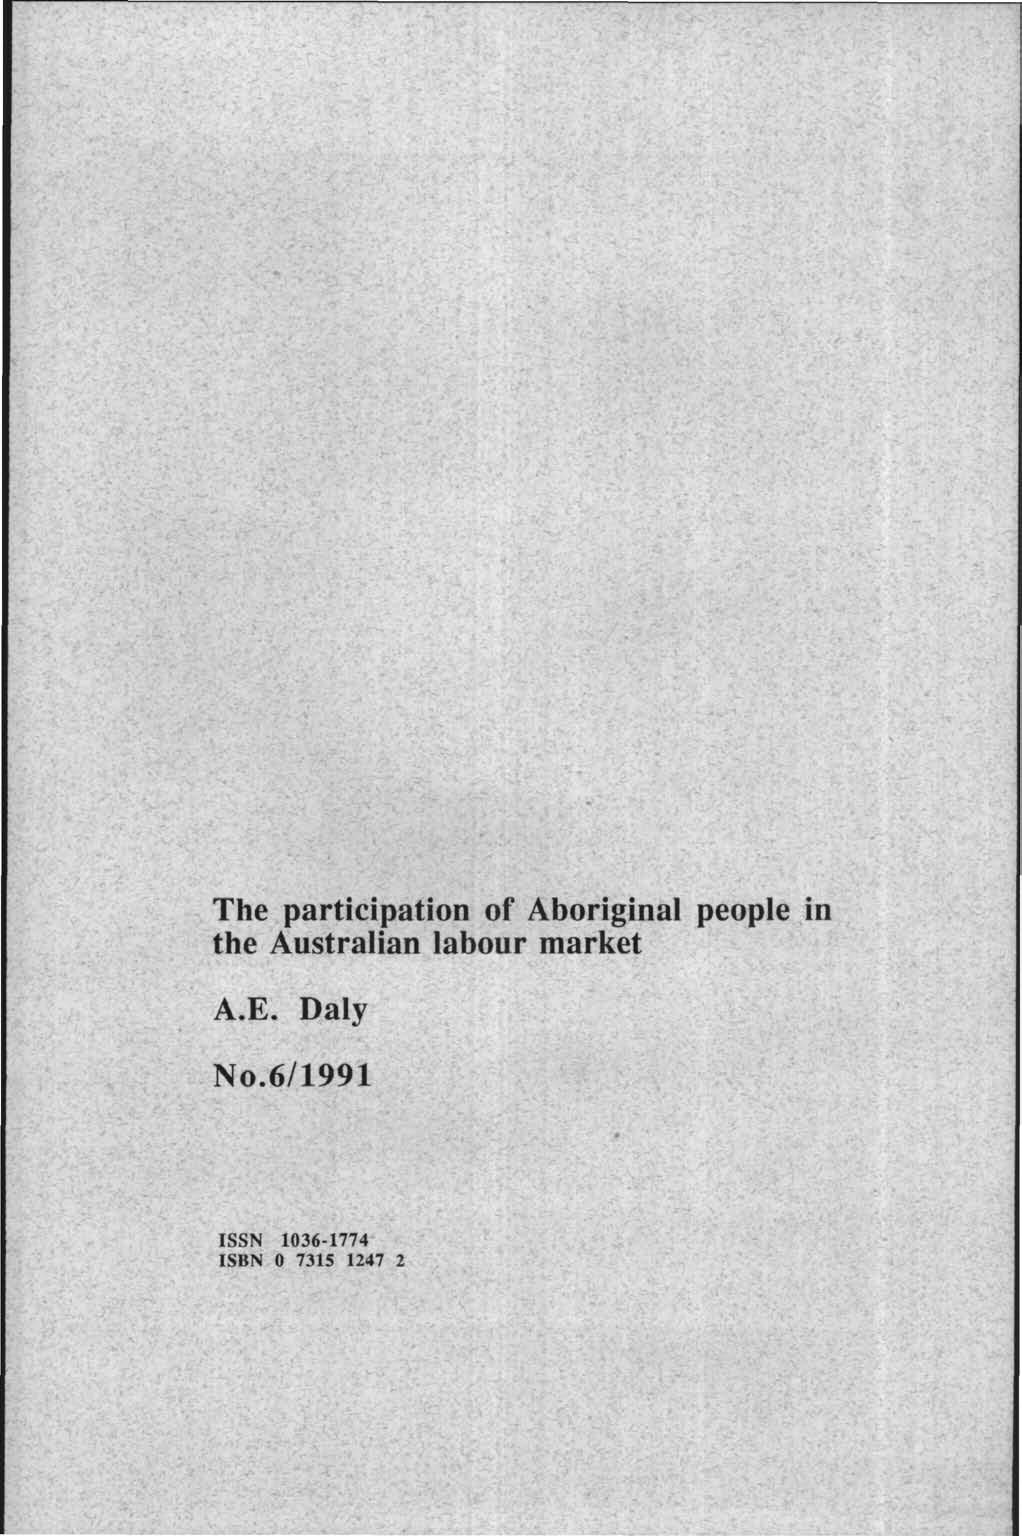 The participation of Aboriginal people in the Australian